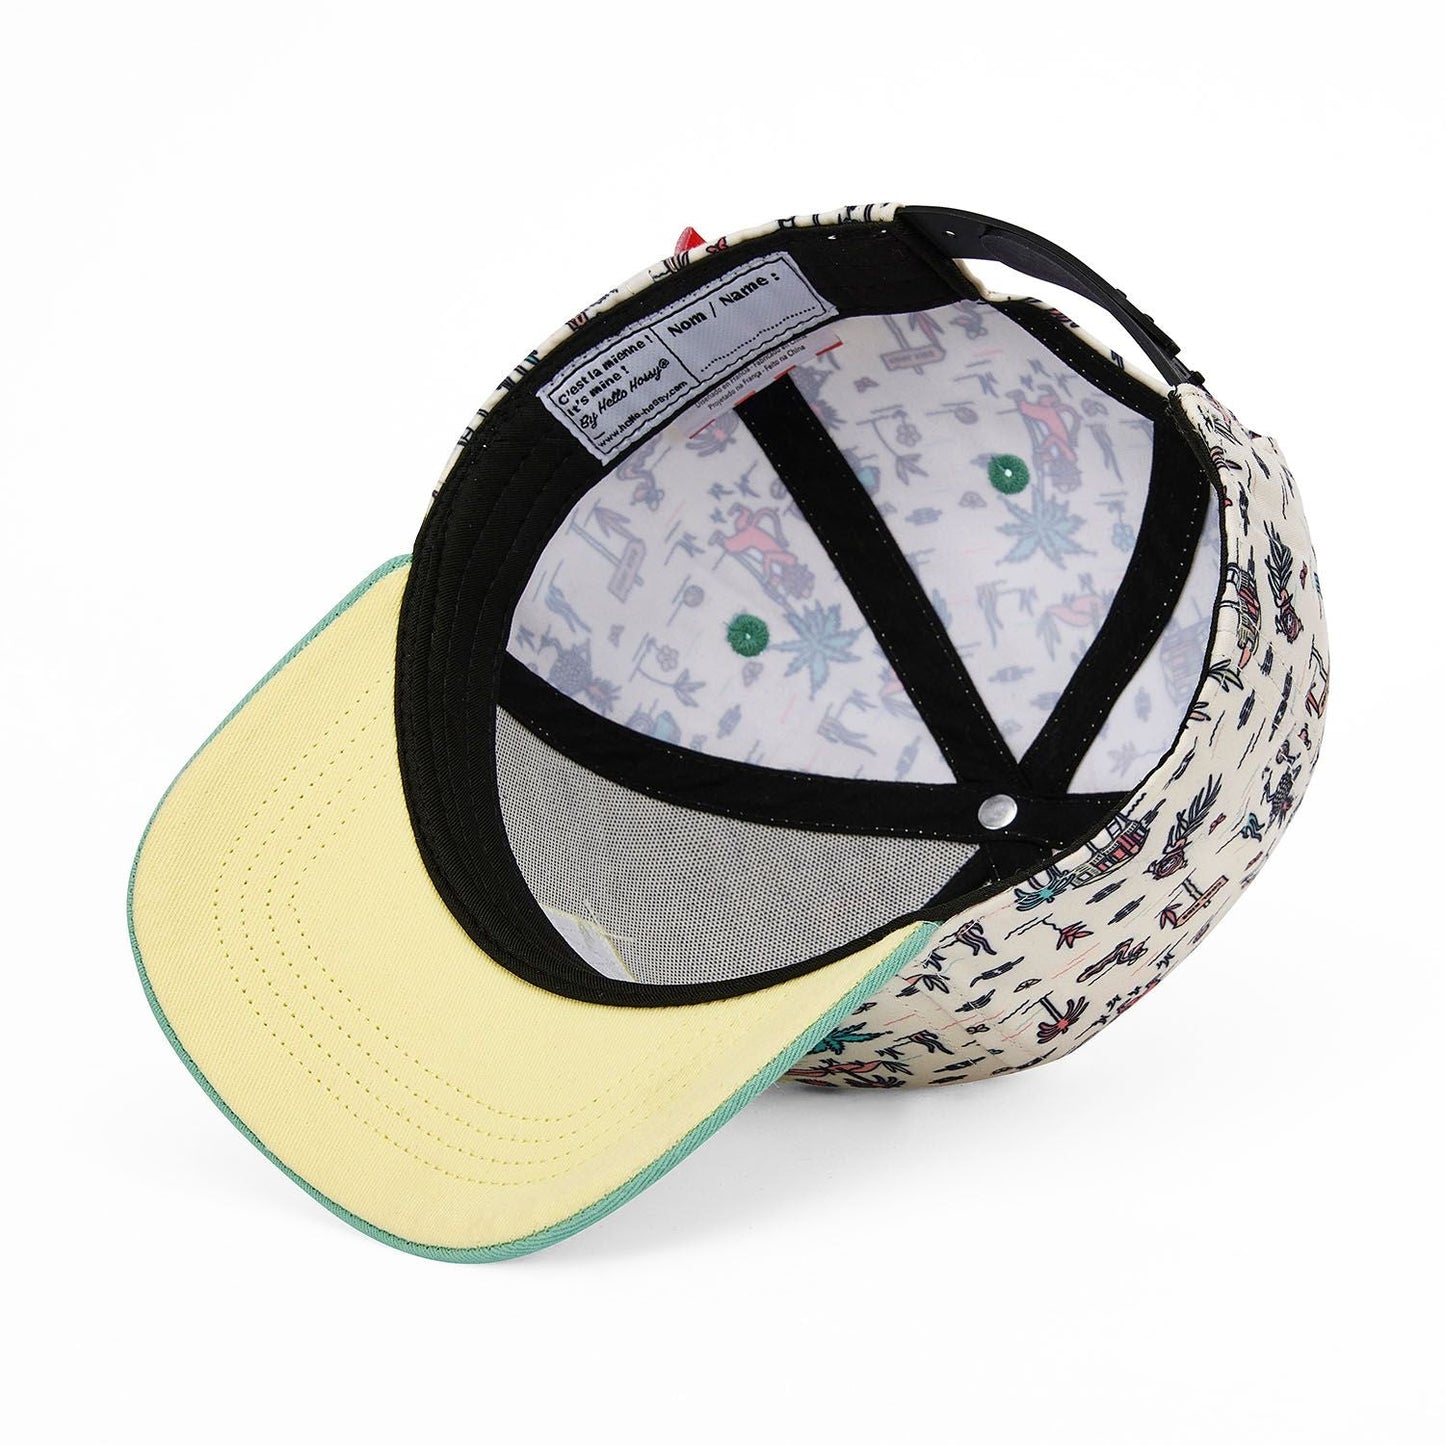 Casquette Jungly 9-18 mois - Cool kids Only - Hello Hossy